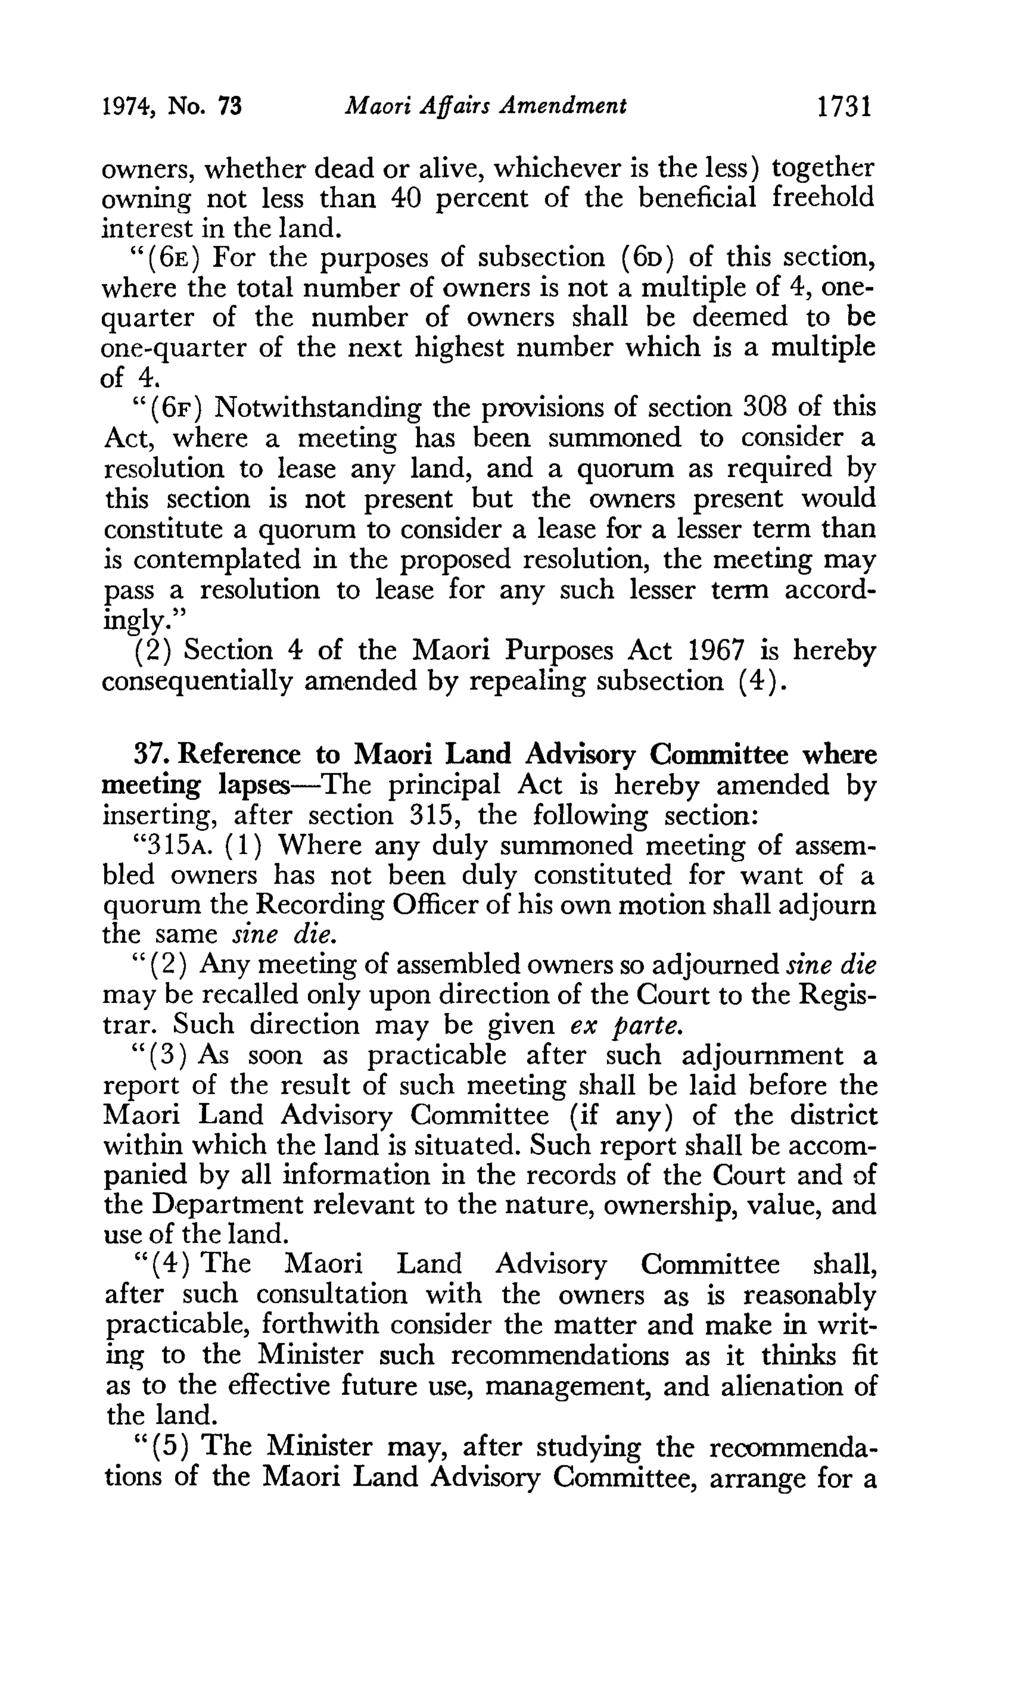 1974, No. 73 Maori Affairs Amendment 1731 owners, whether dead or alive, whichever is the less) together owning not less than 40 percent of the beneficial freehold interest in the land.